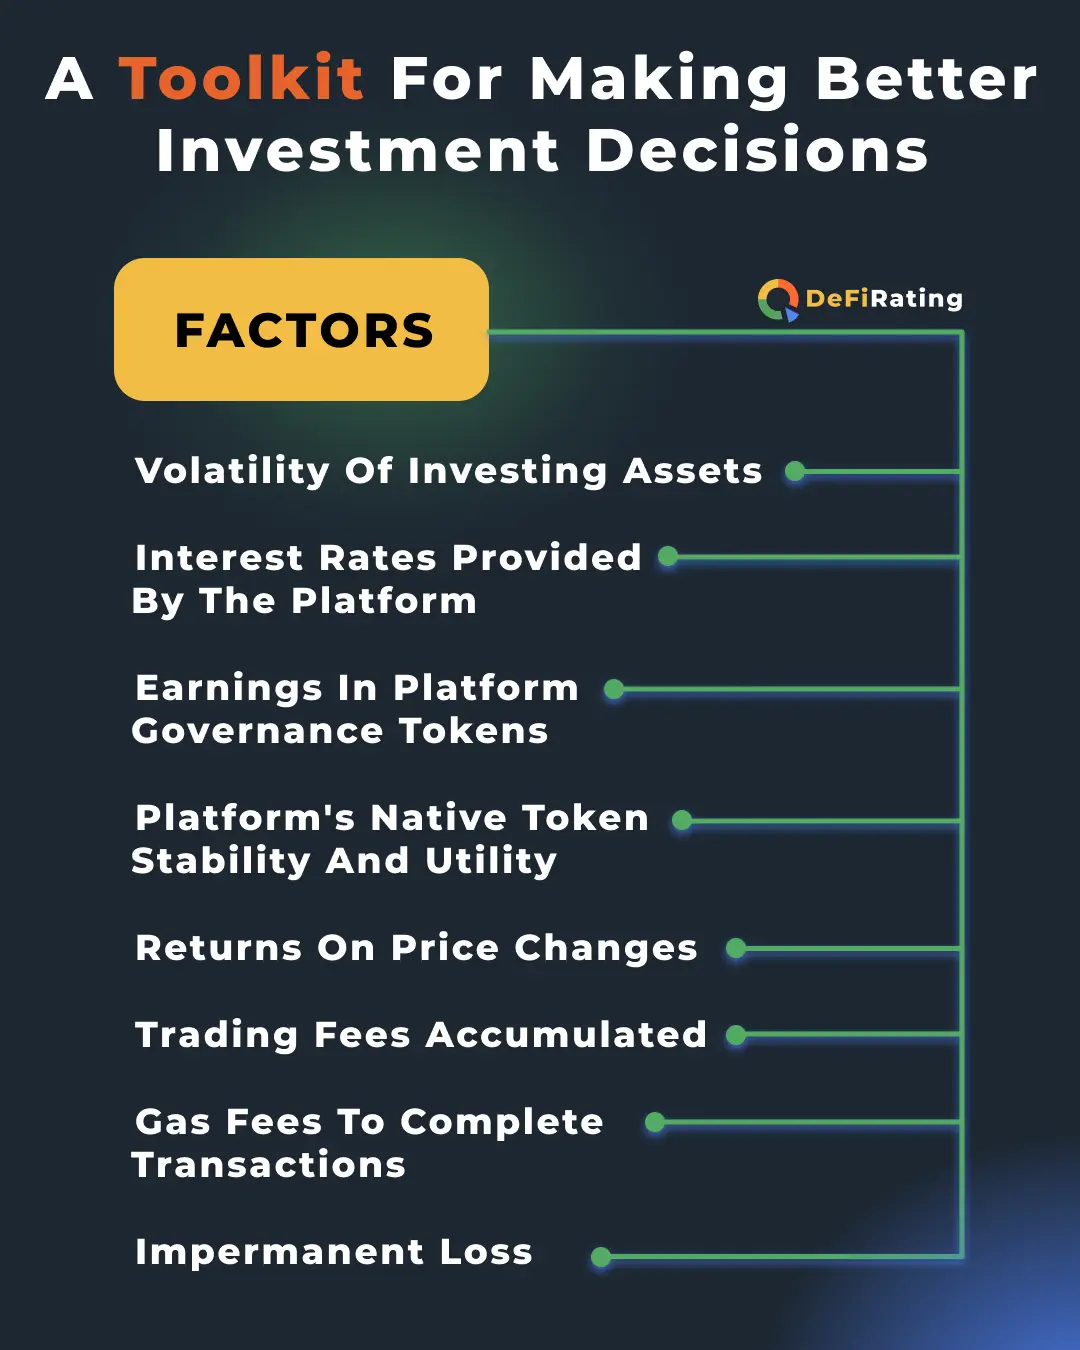 Q DeFi Rating: Game-Changing Tool for Smart Investing